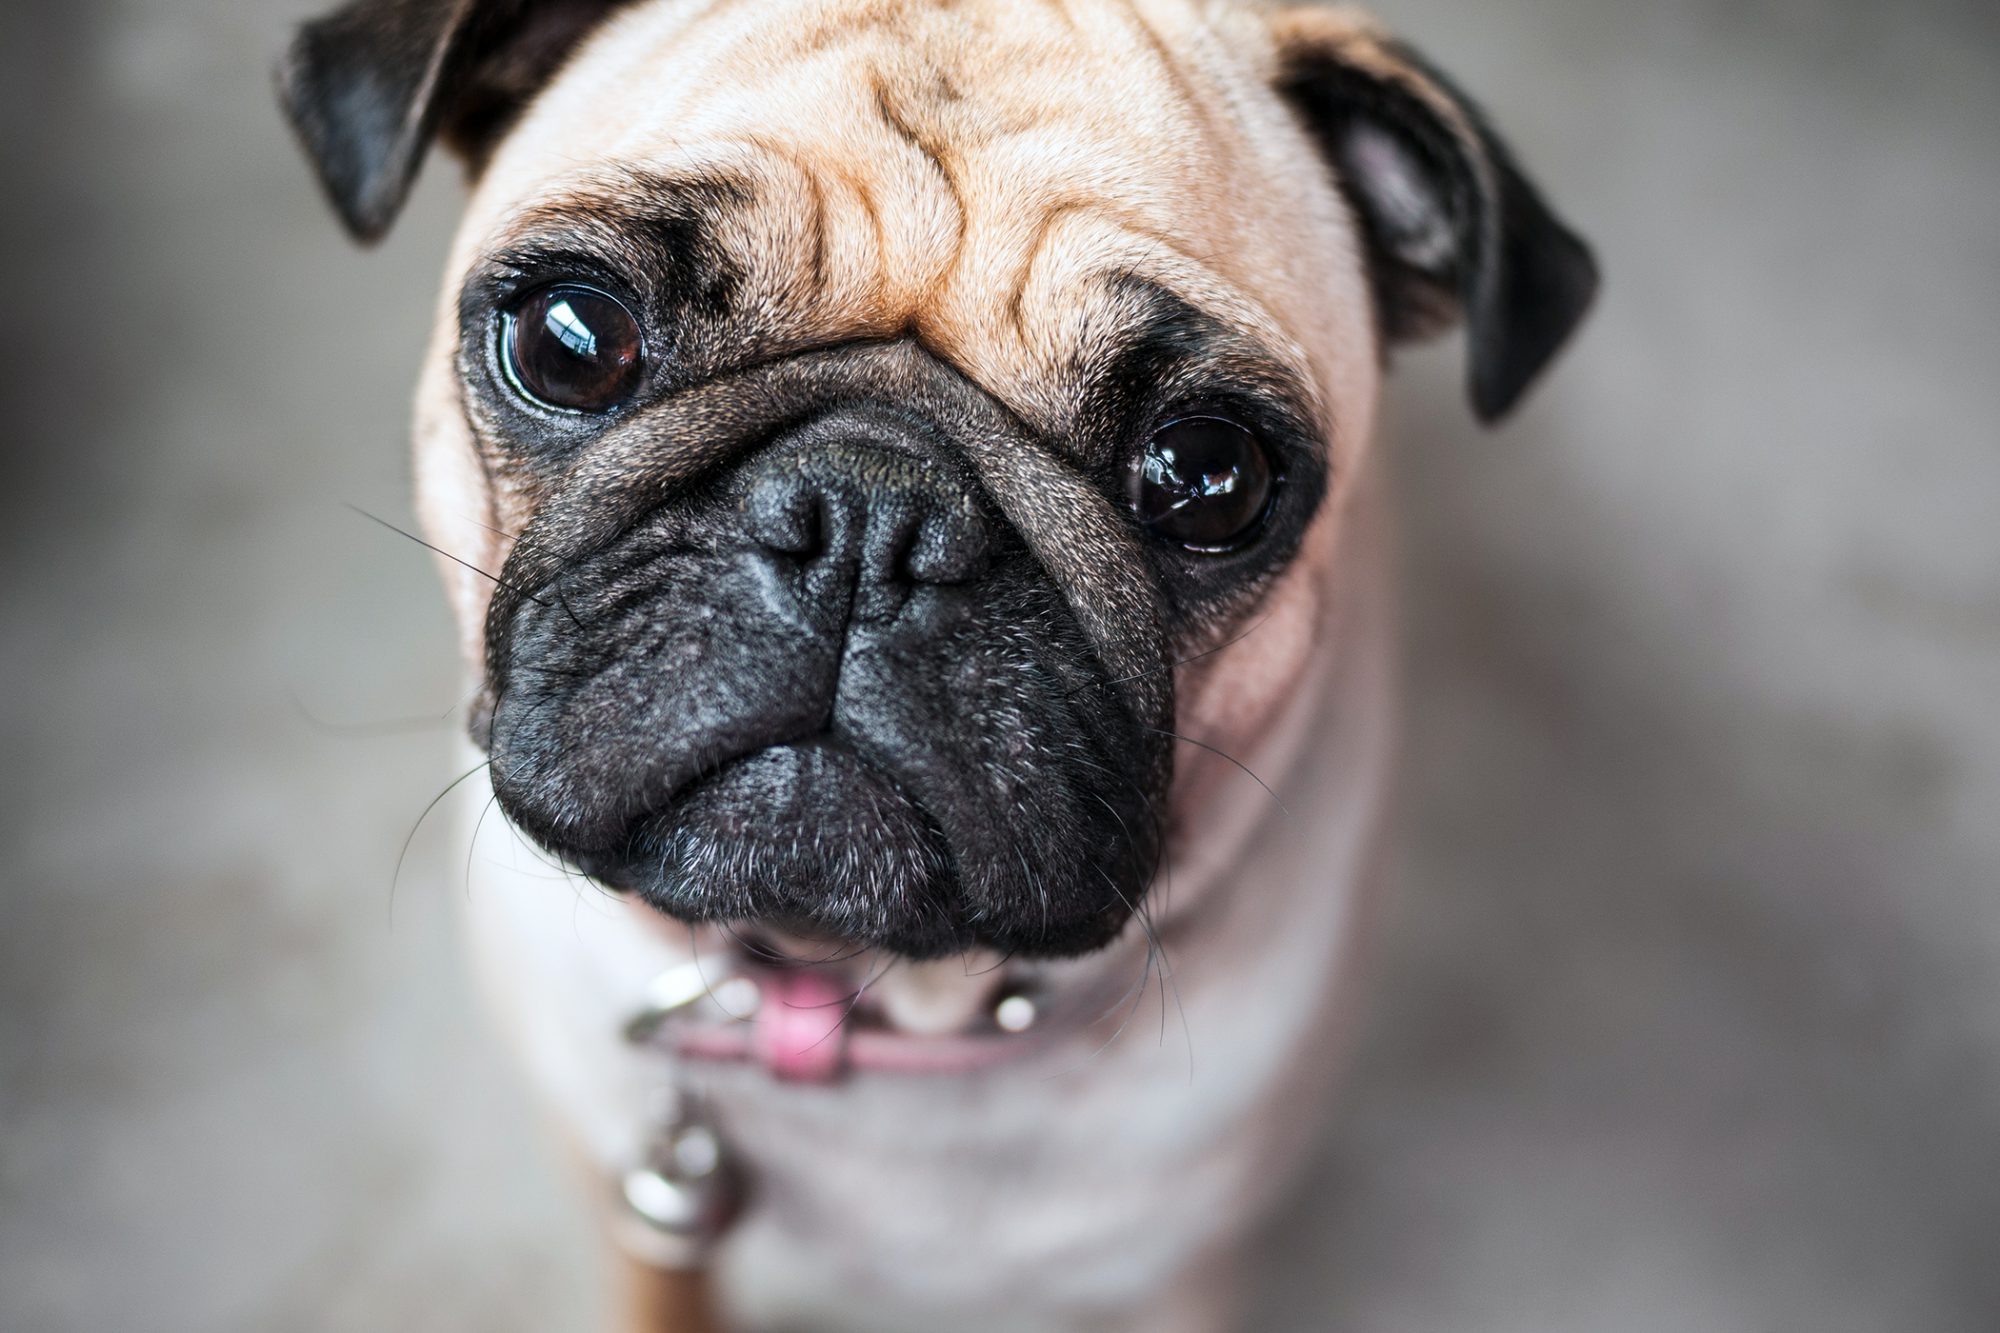 How do you treat cloudy eyes in dogs?